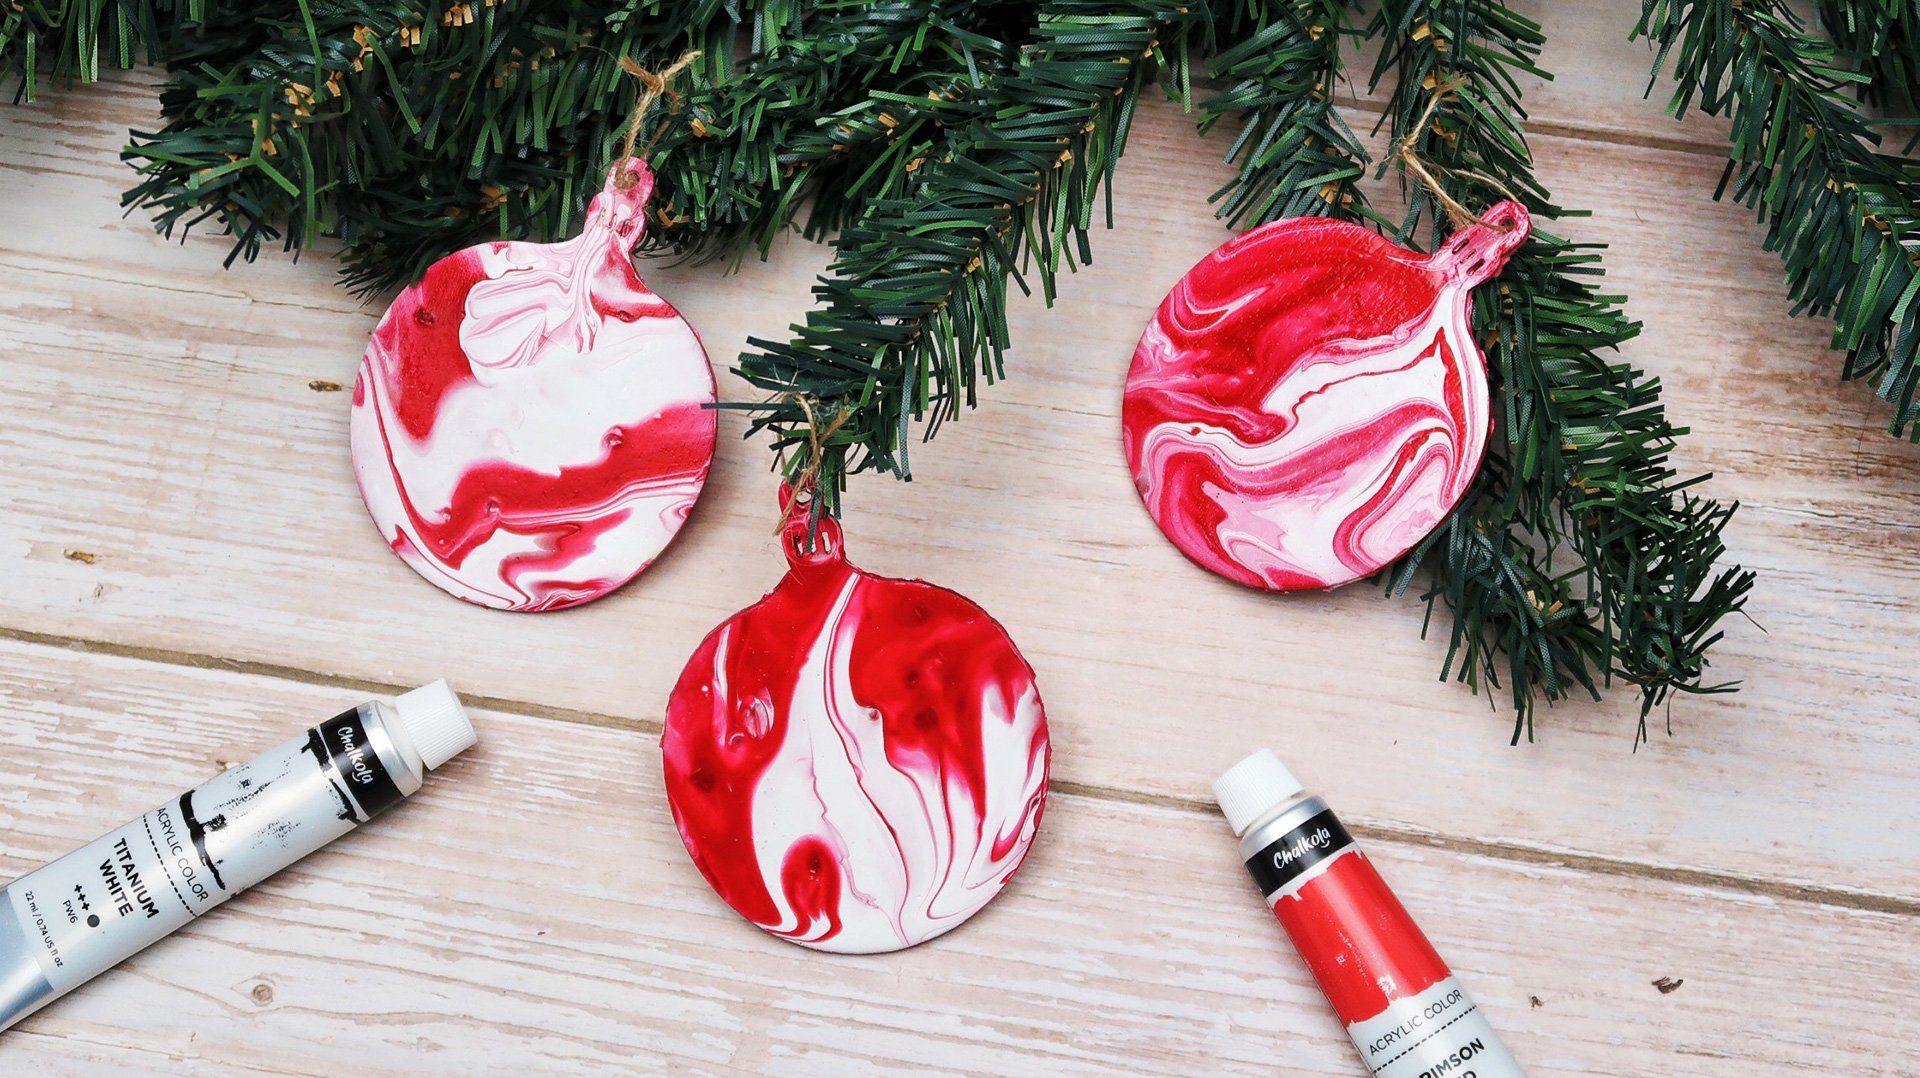 Design Ornaments by Acrylic Pouring | Chalkola Art Supply